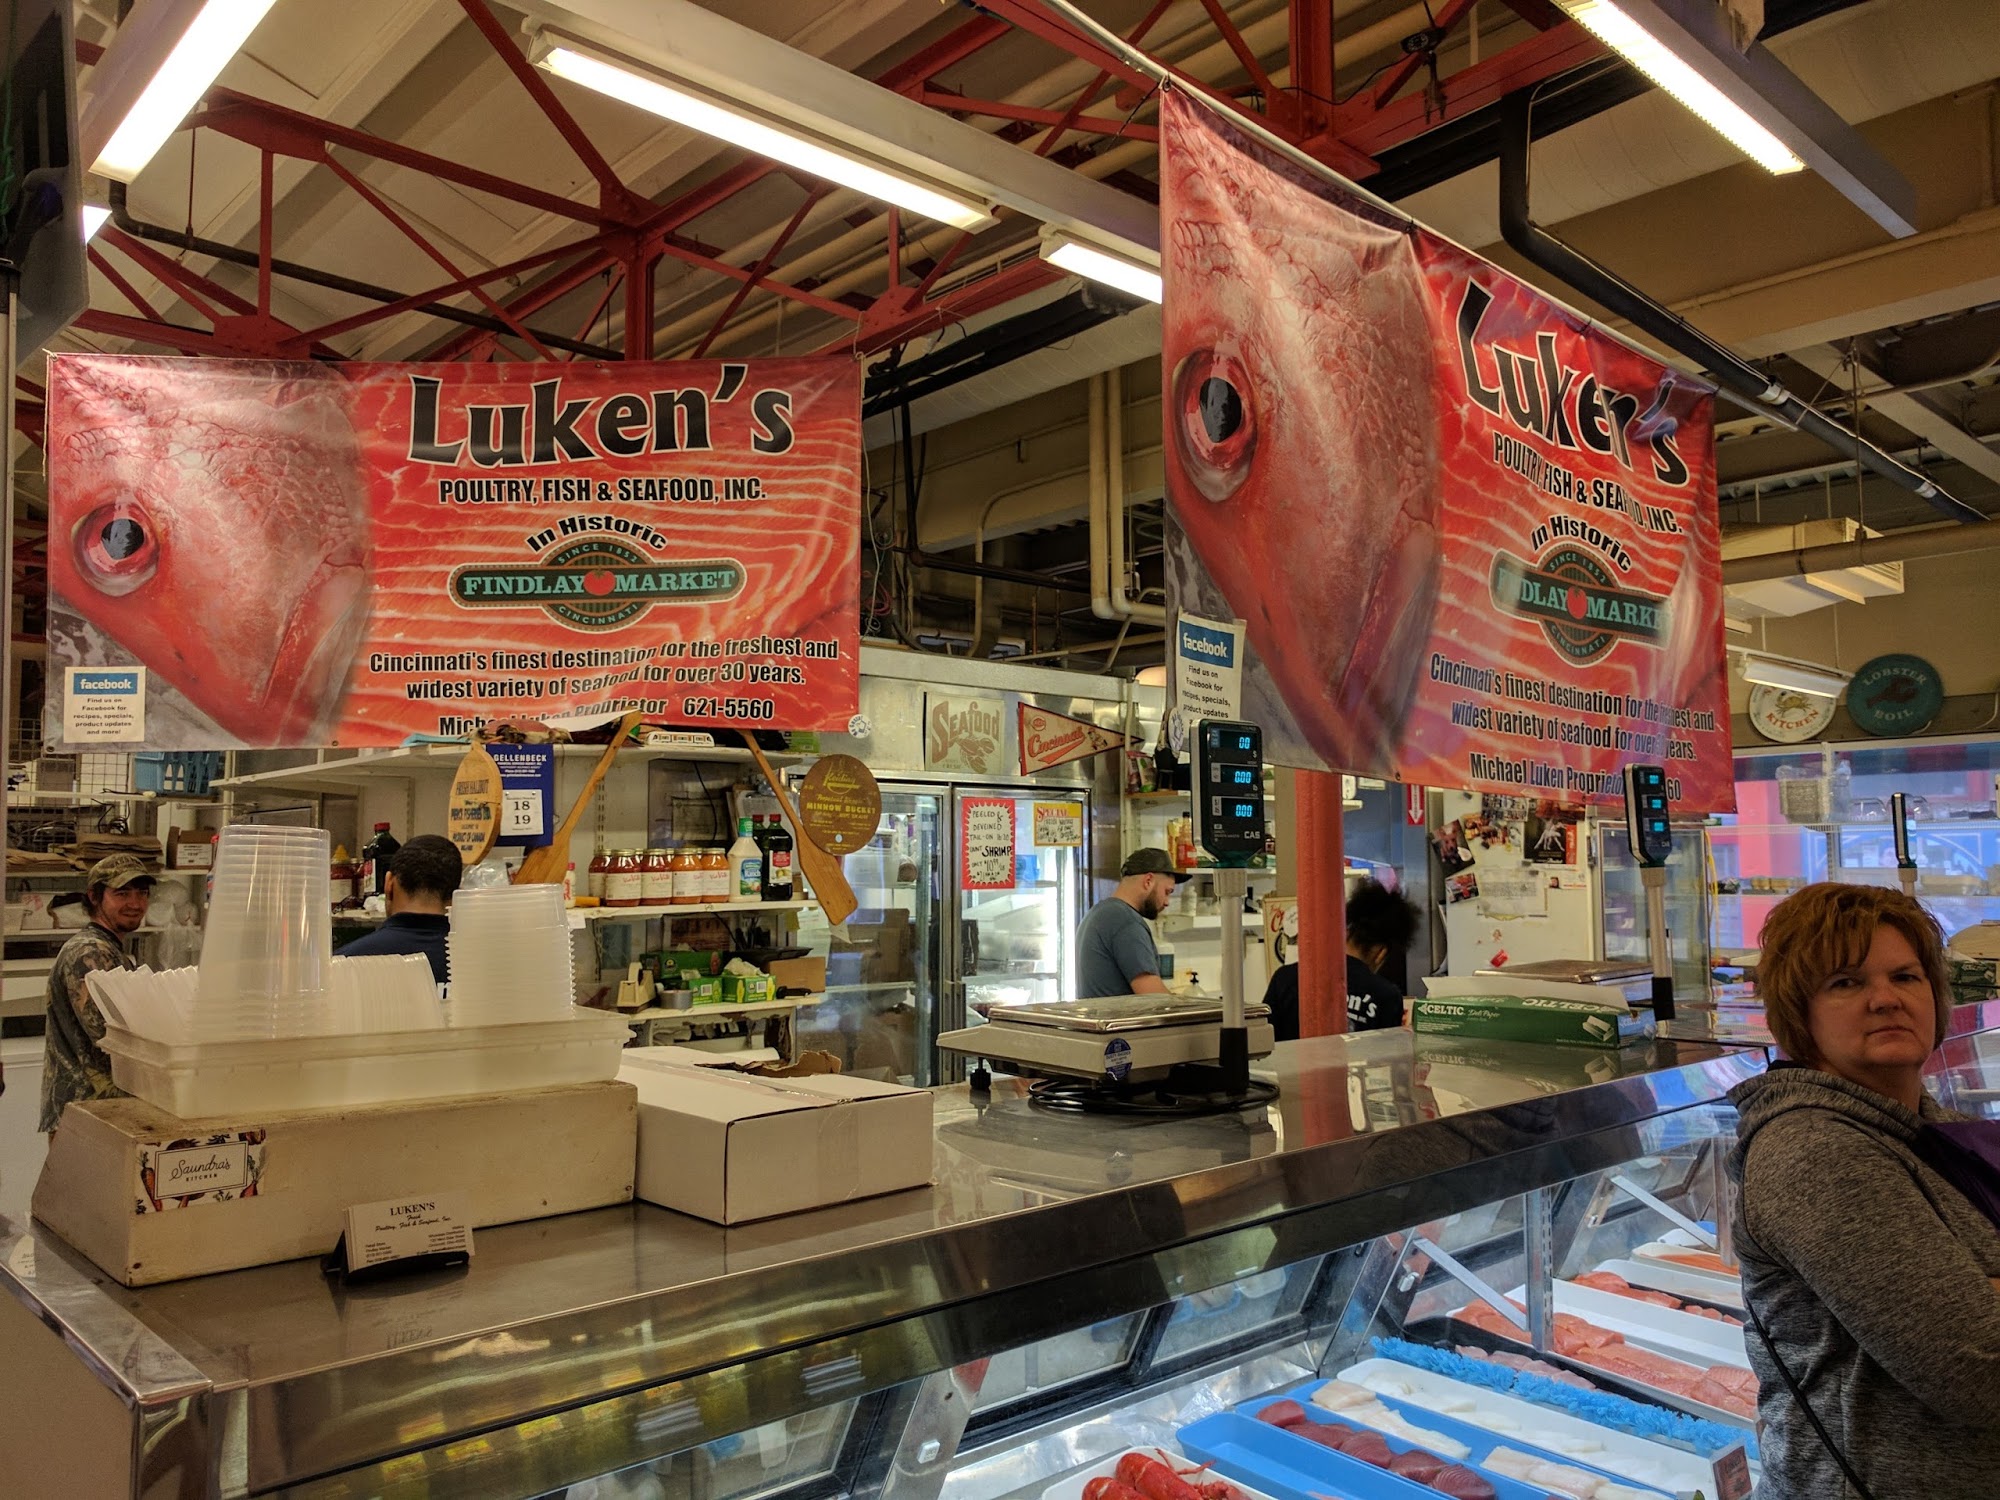 Luken's Poultry Fish & Seafood